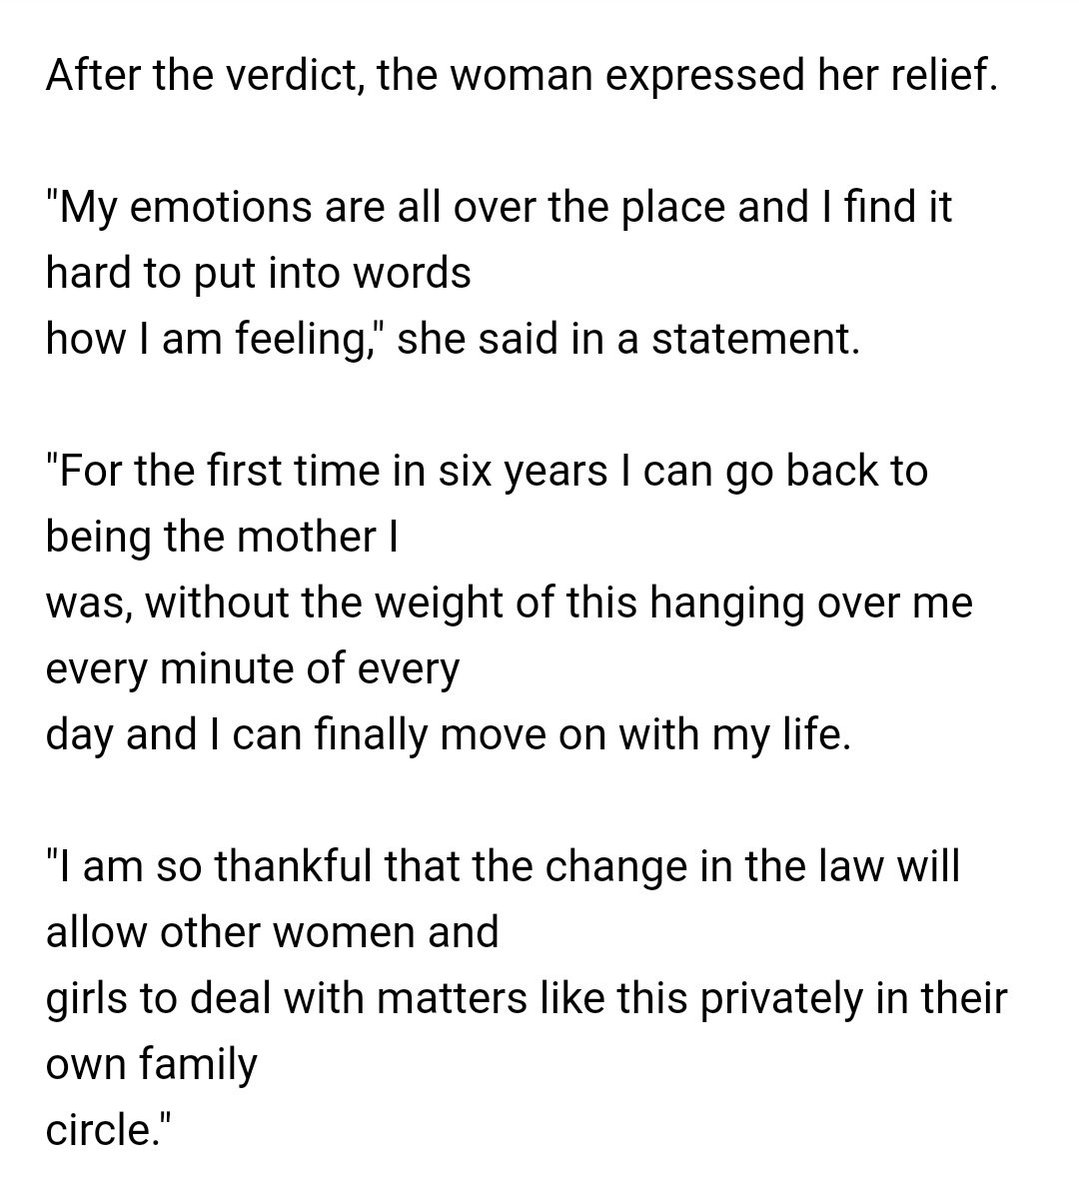 The mother in Northern Ireland who was being prosecuted after buying abortion pills for her teenage daughter has now been formally acquitted. Decriminalisation in action. Thank you @stellacreasy #TheNorthIsNow #NowForNI